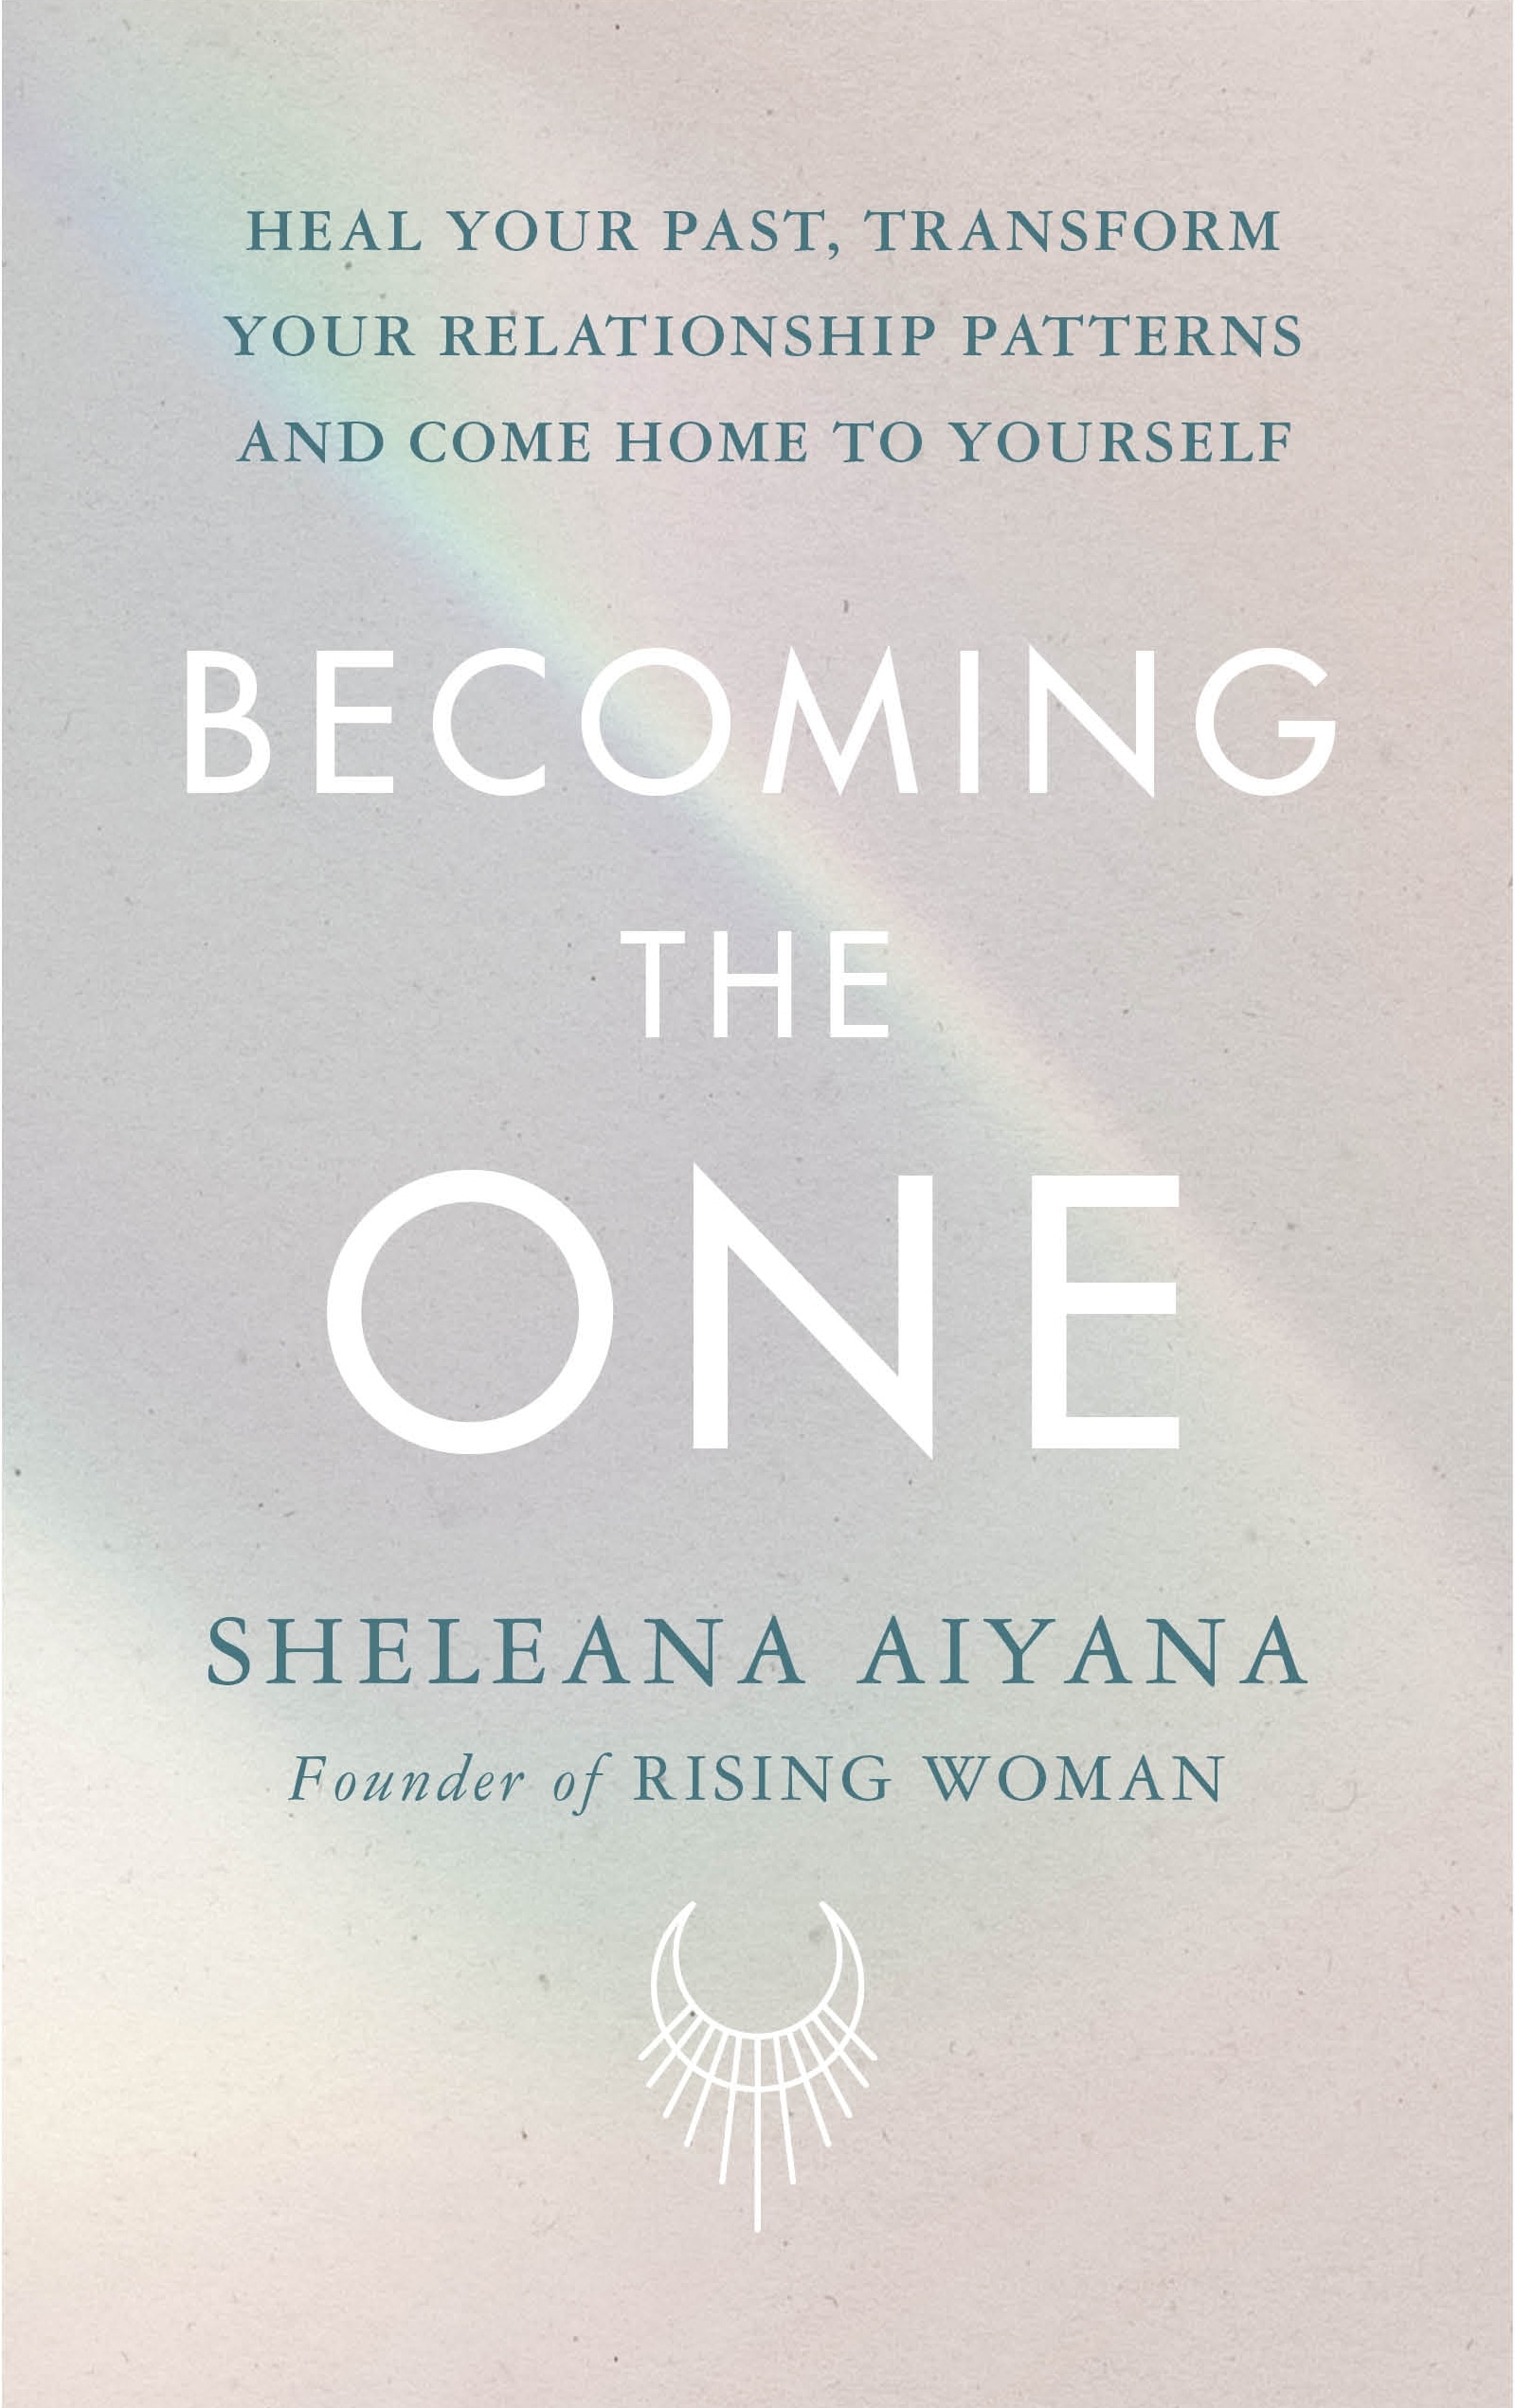 Book “Becoming the One” by Sheleana Aiyana — March 24, 2022